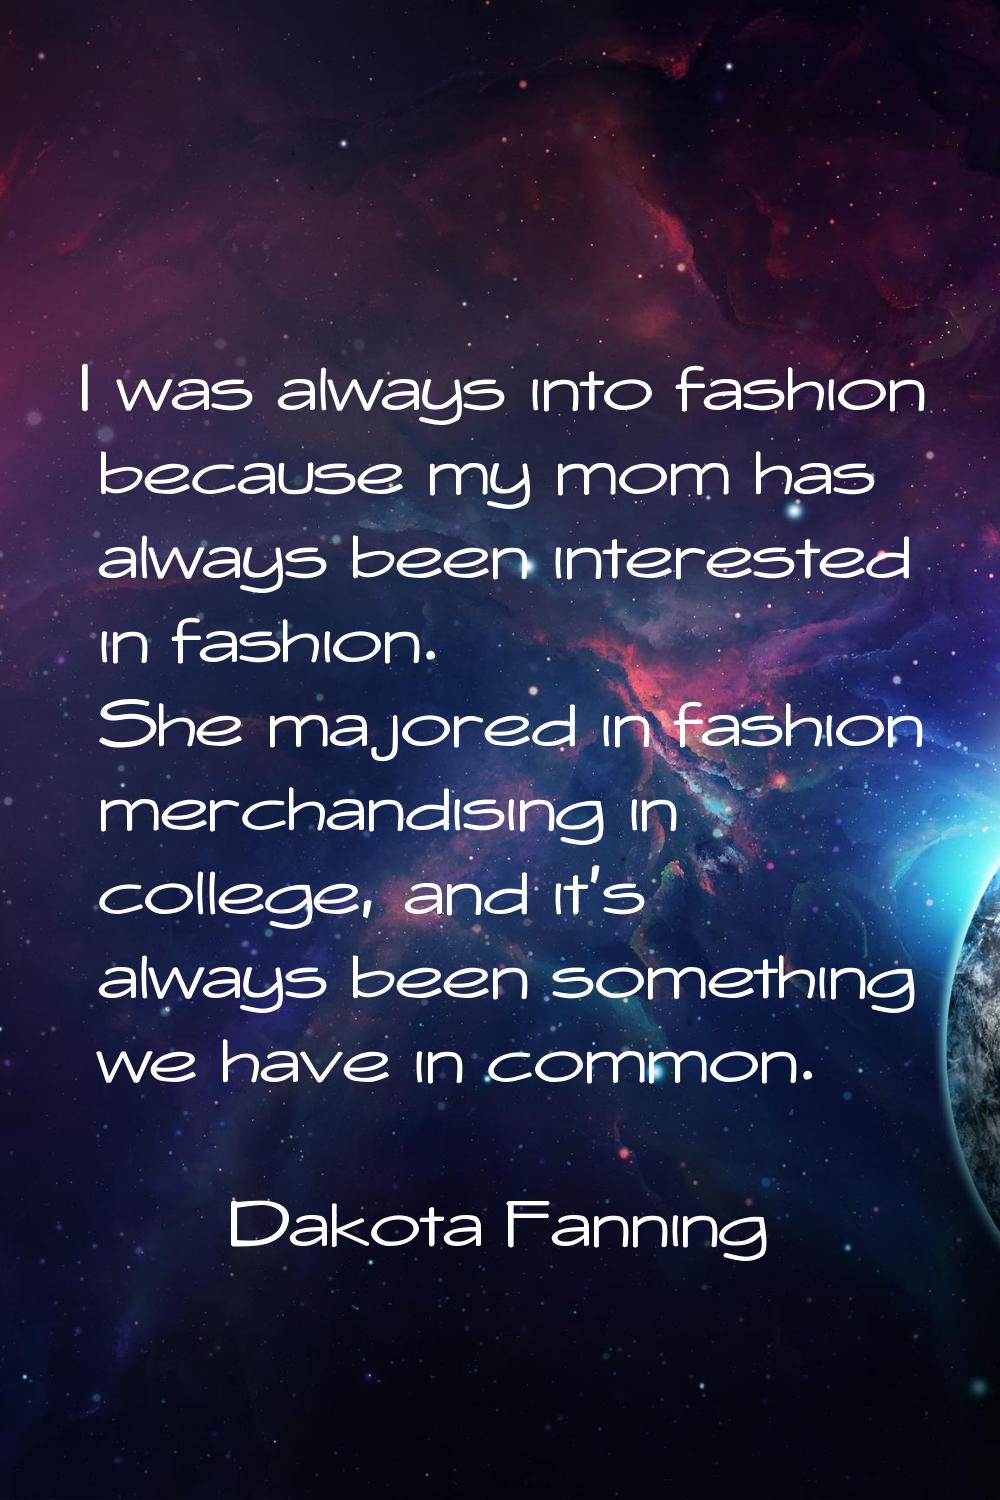 I was always into fashion because my mom has always been interested in fashion. She majored in fash